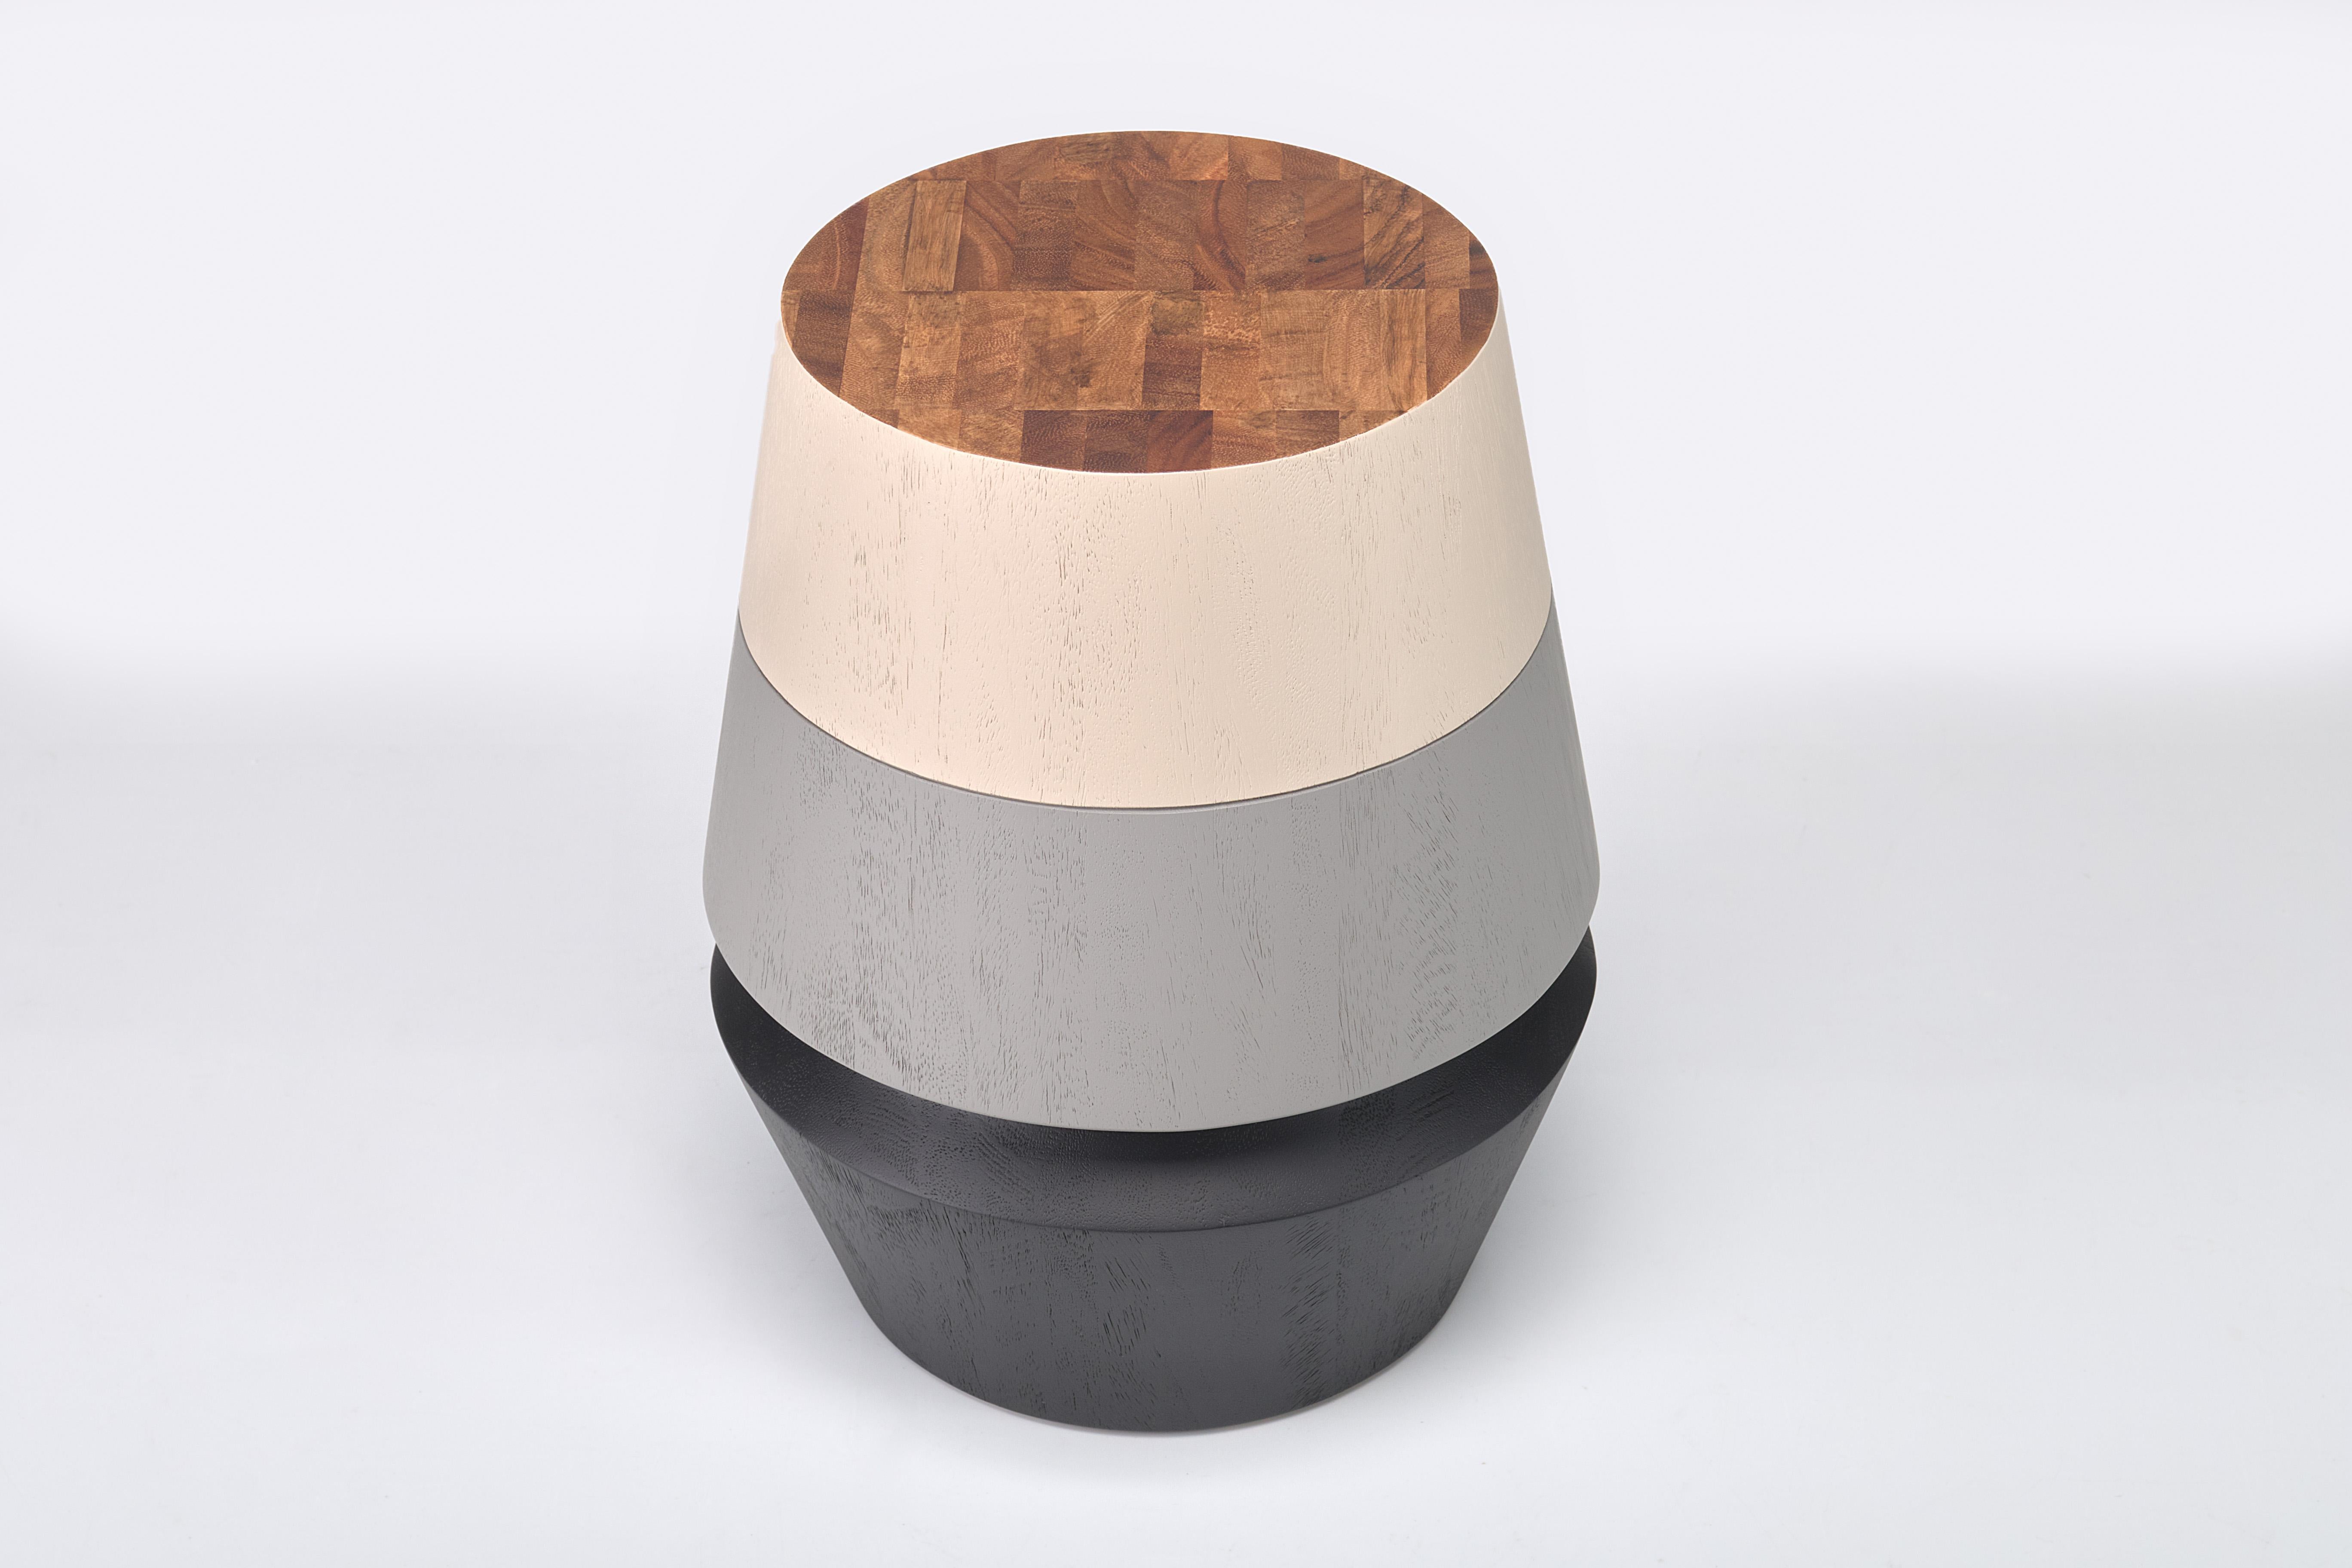 The capirucho side table and stool are inspired by a popular yet simple toy enjoyed for many generations by kids in Guatemala. The piece has a playful Silhouette turned with conacaste, and it can be accentuated with colorful bands creating a more